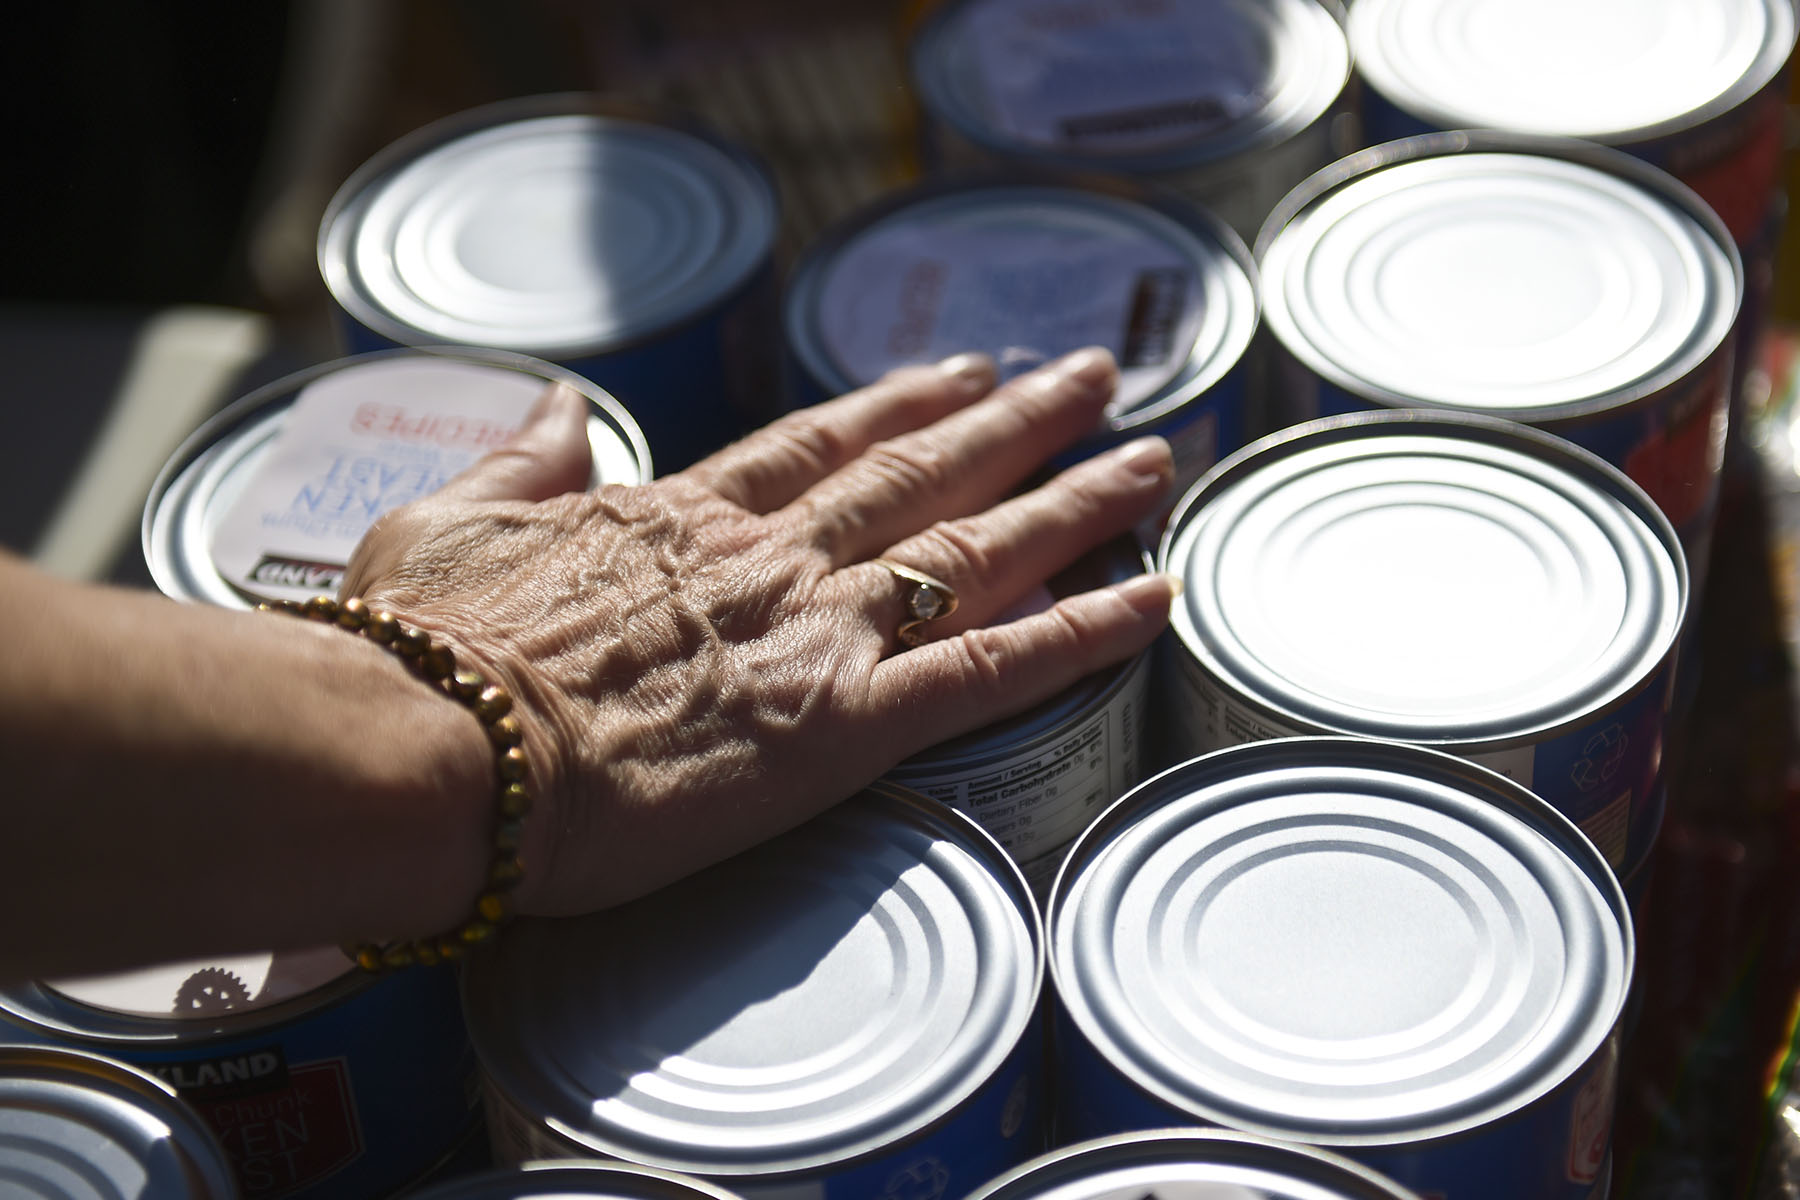 A woman's hand is seen resting on canned goods.